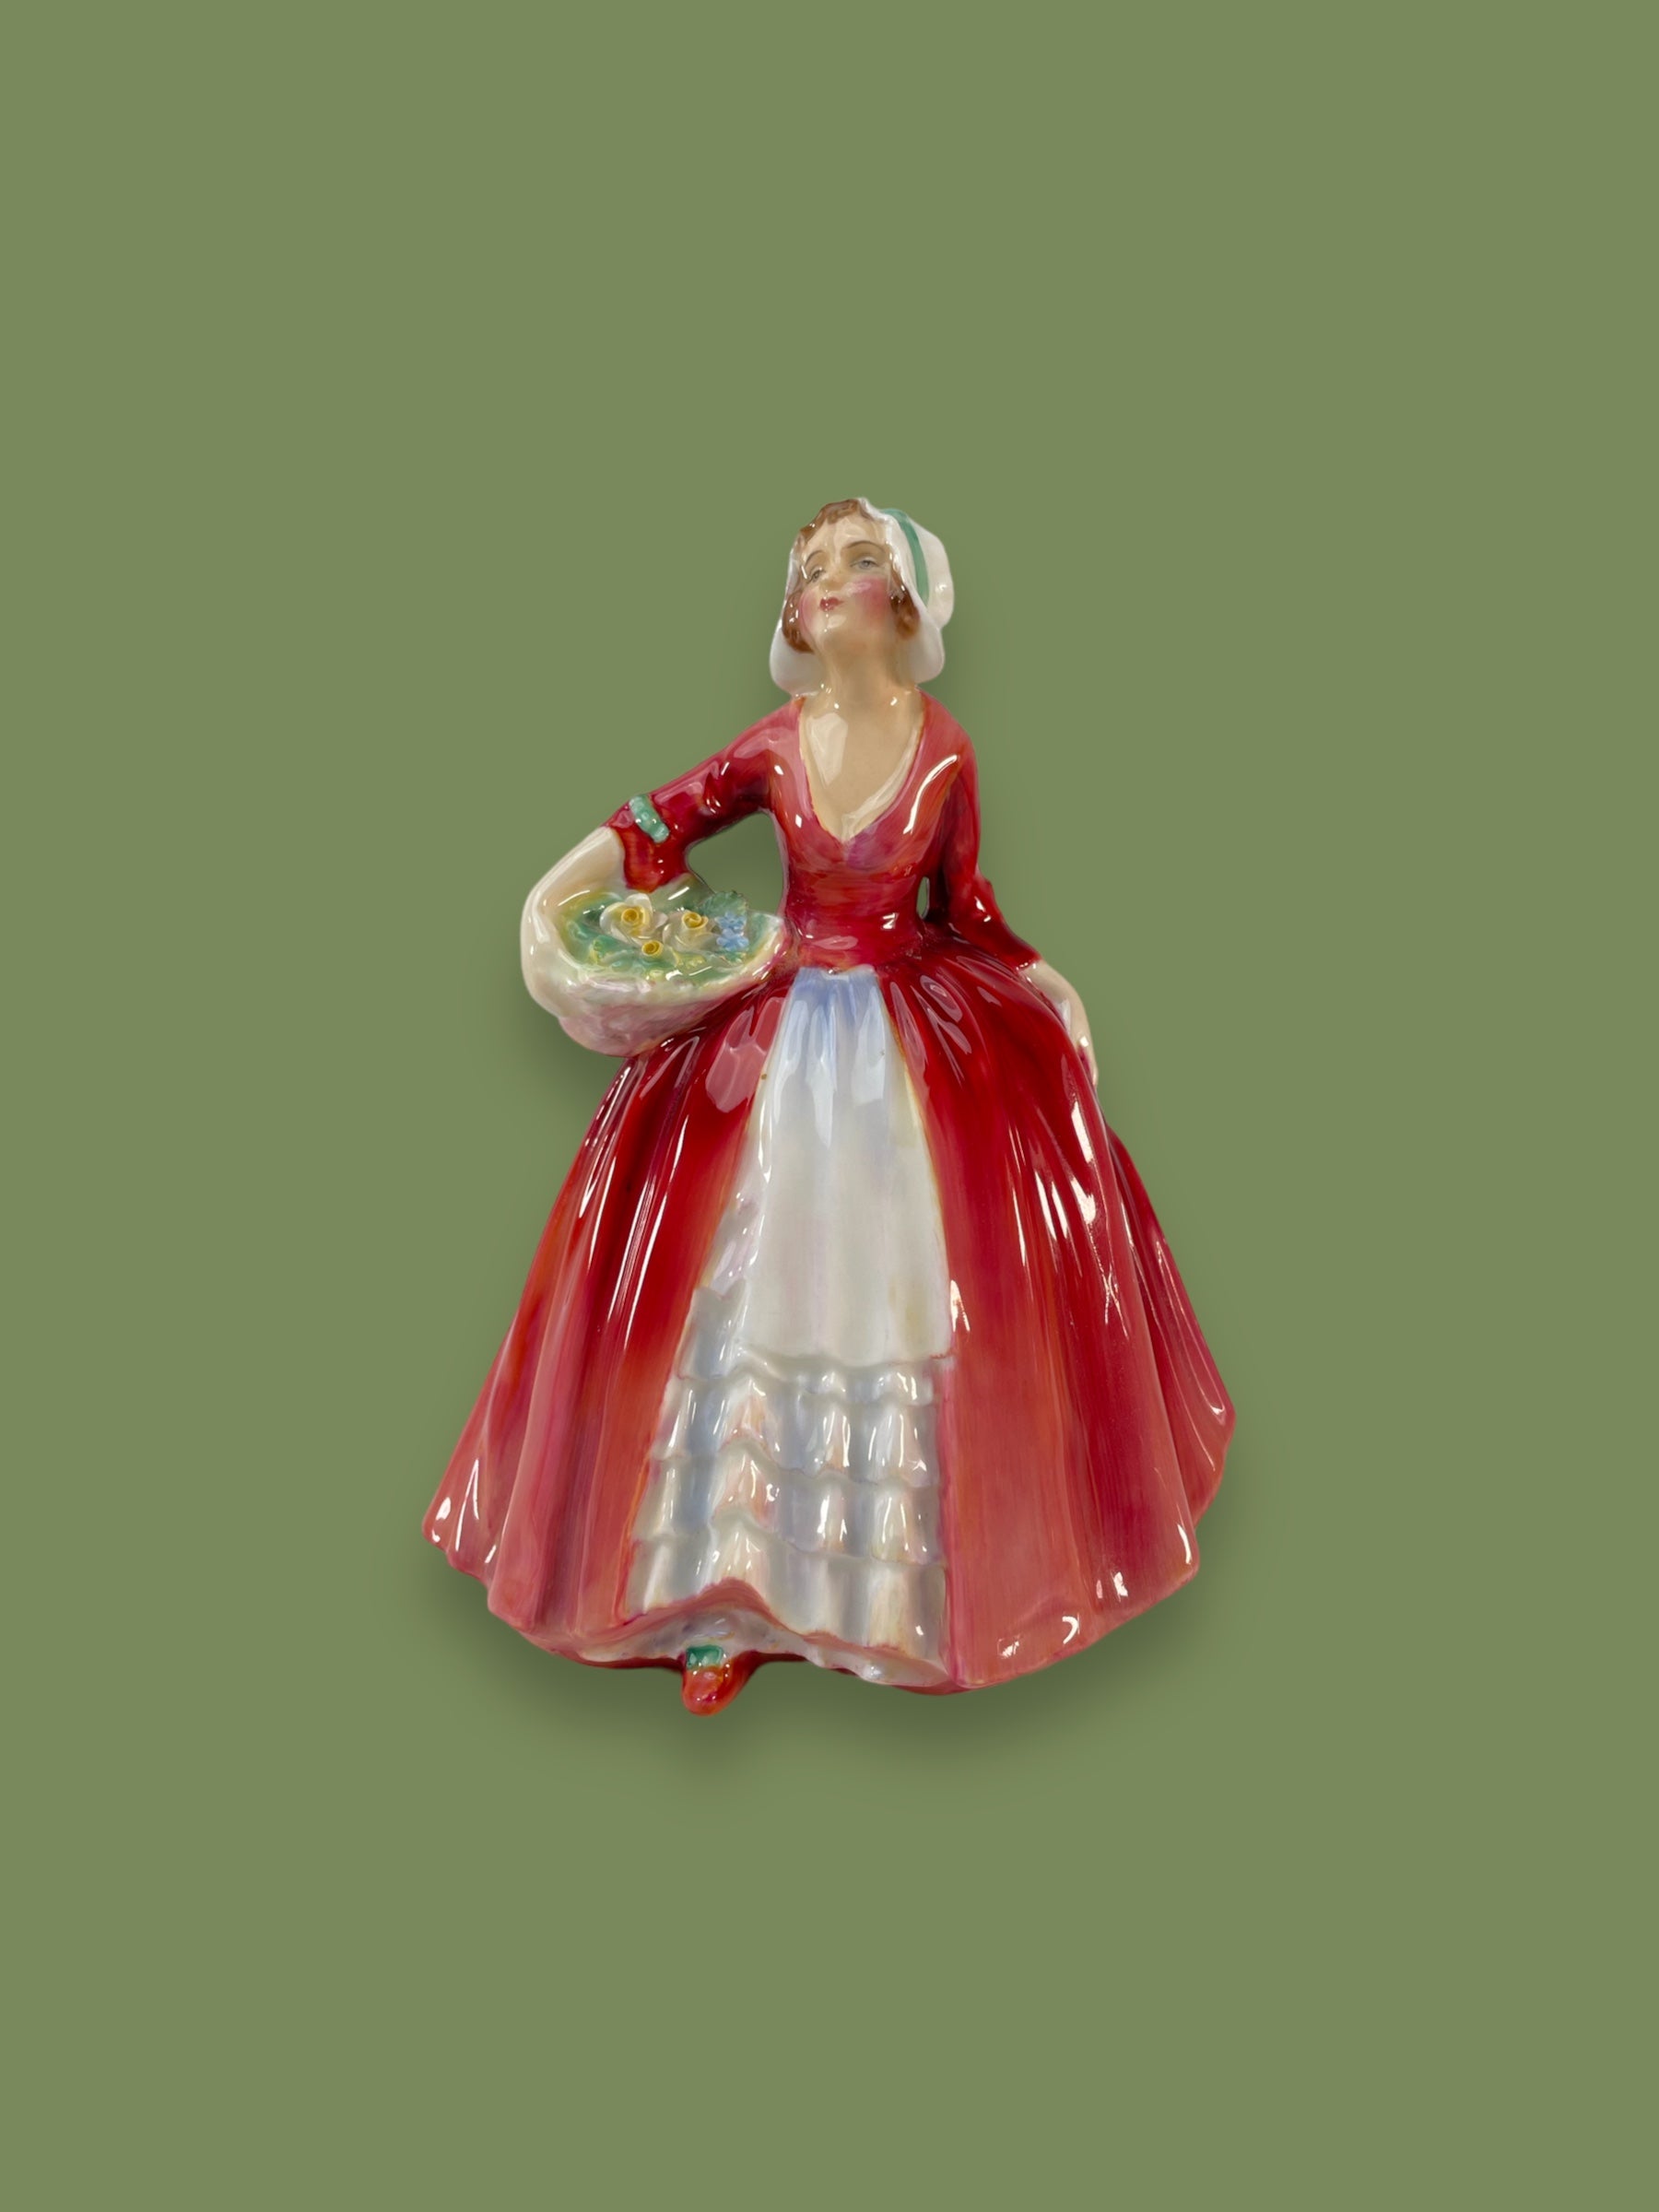 "Janet" #HN 1537 Figurine by Royal Doulton